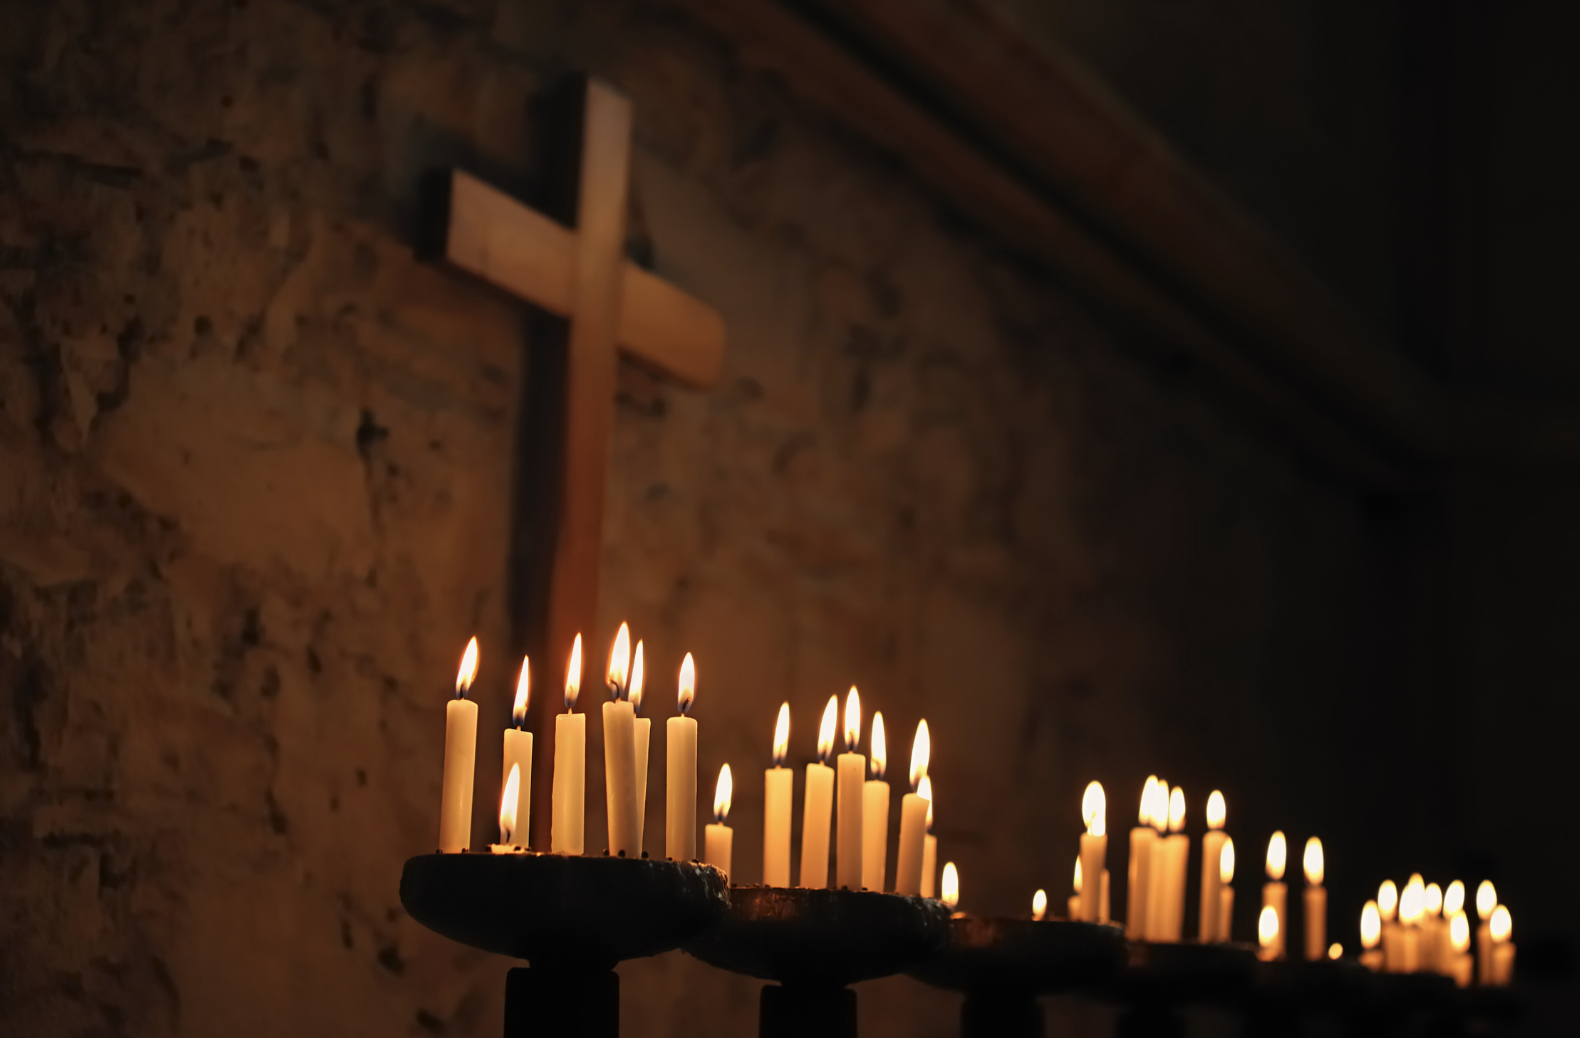 A picture of prayer candles with a wooden cross